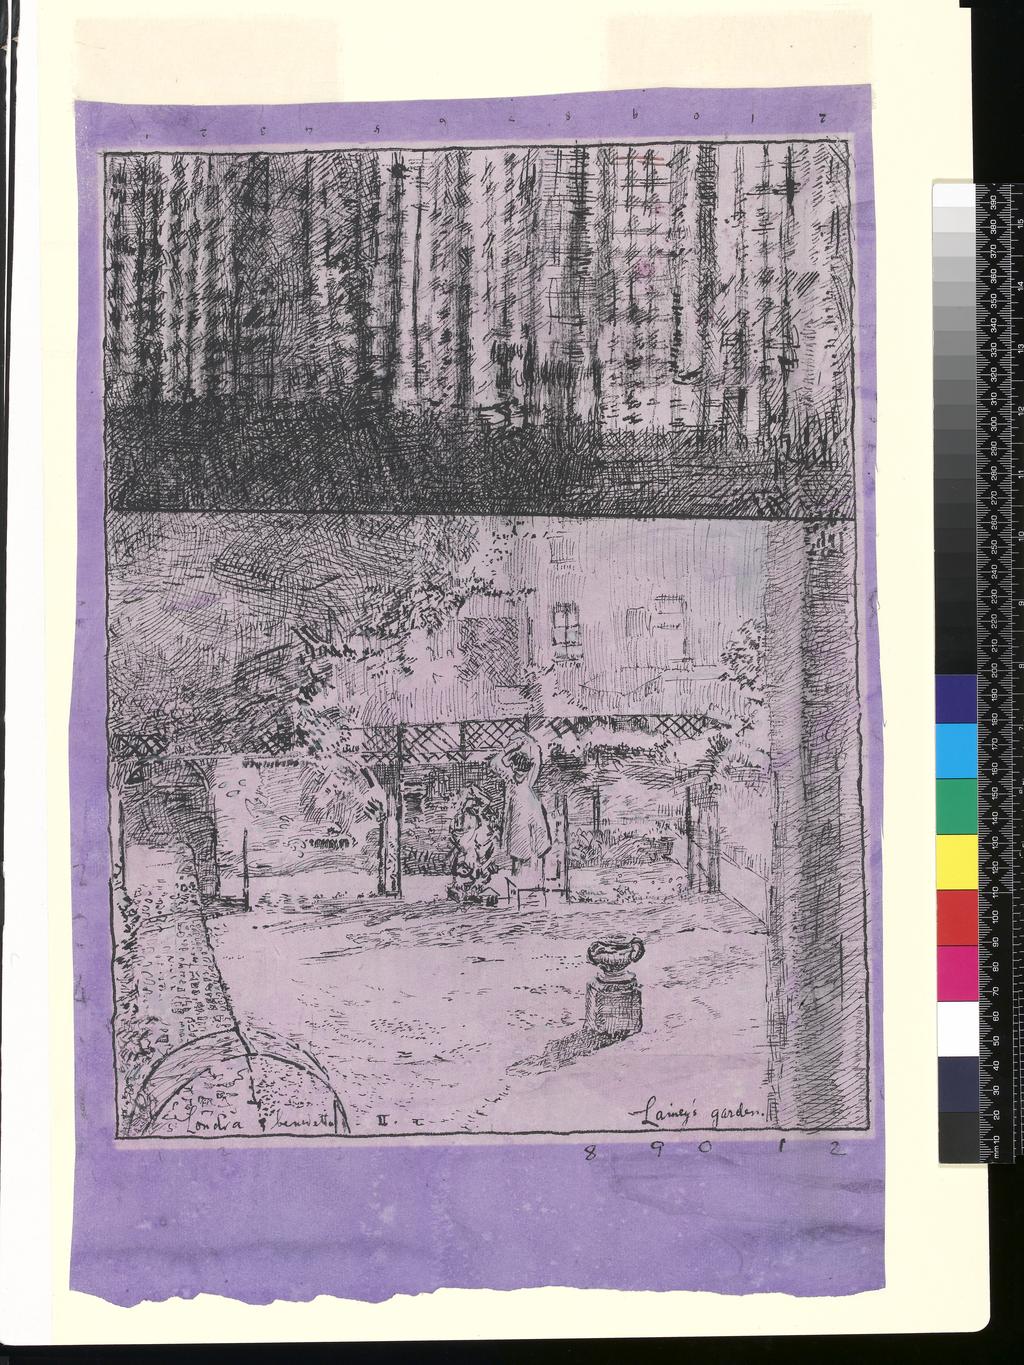 An image of Lainey's Garden. Sickert, Walter Richard. Pen and Indian ink on mauve paper. Height 406 mm, width 308 mm. A study for the oil painting "The Garden of Love" (no. 2726). Circa 1927-1931.